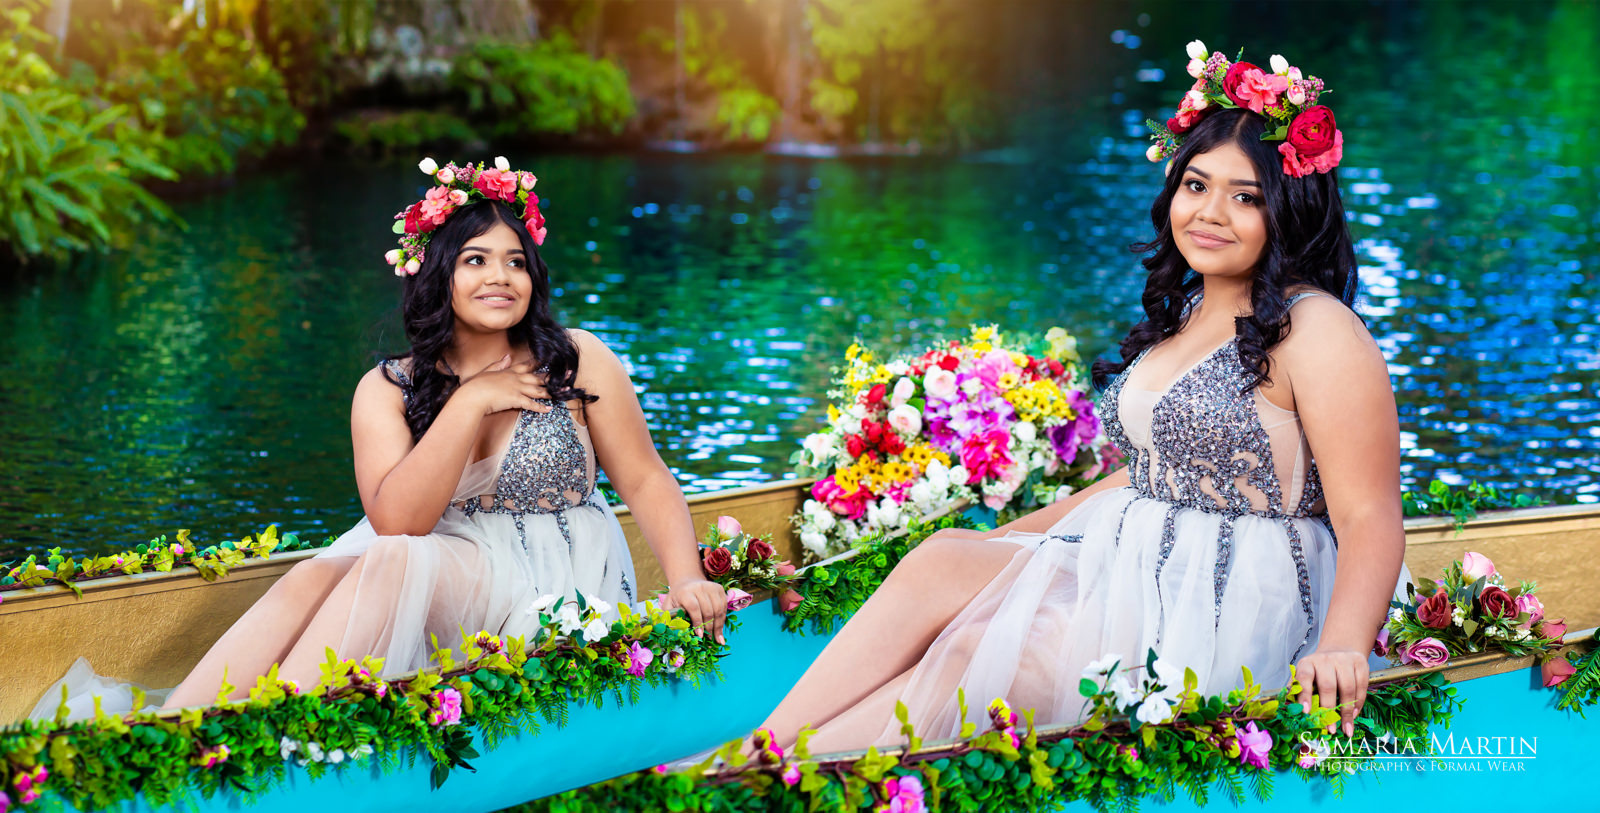 Quinceanera with flowers, quinceanera photoshoot in a lake, 15 photoshoot with flowers, best Tampa photographer, Samaria Martin Photographer 2